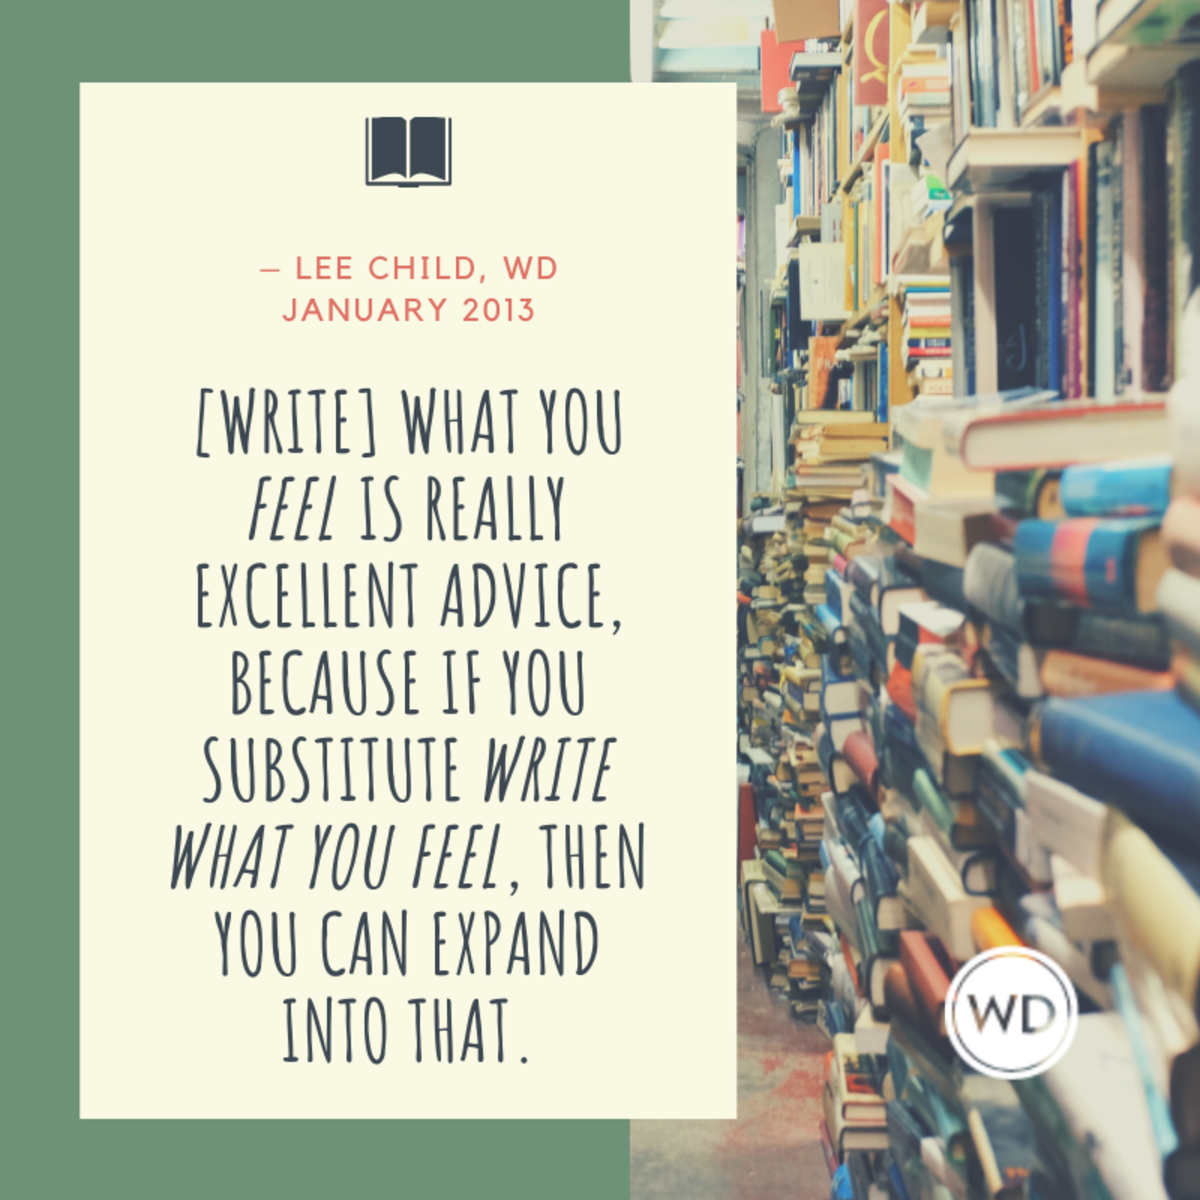 Lee Child quotes about writing